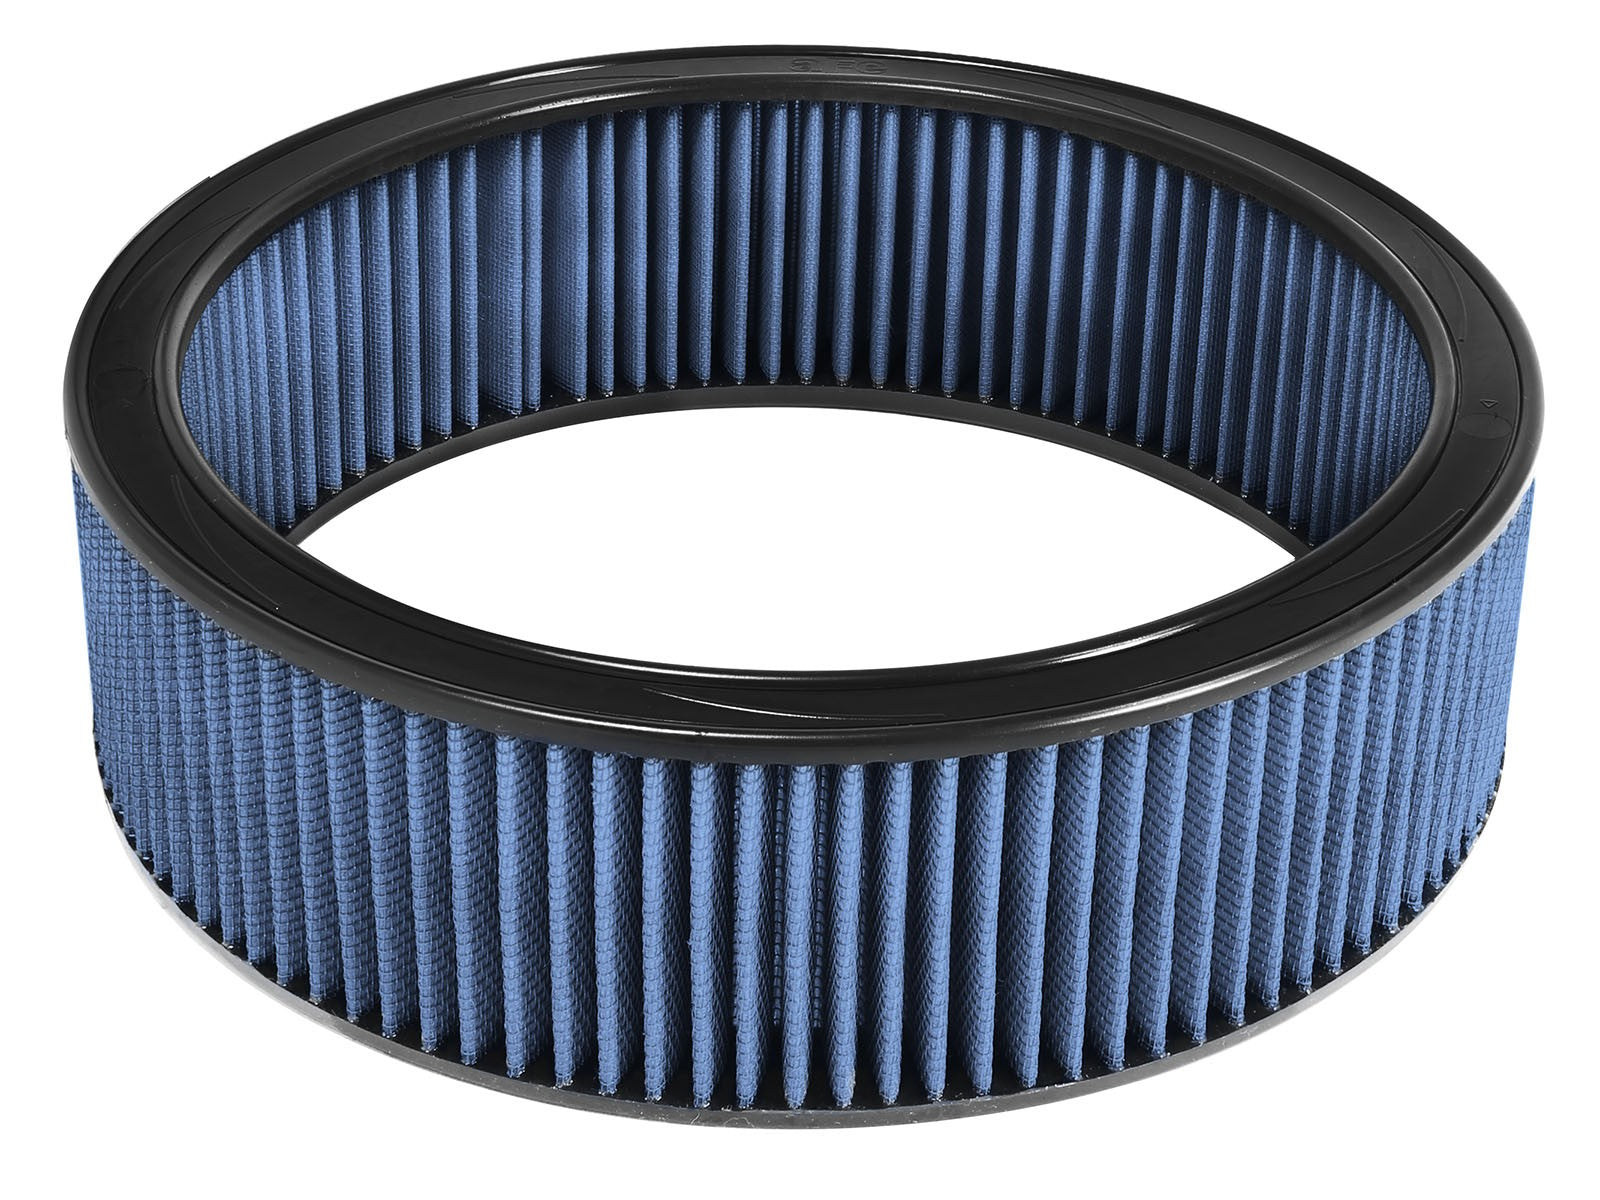 Magnum FLOW Round Racing Air Filter w/ Pro 5R Media 14 IN OD x 12 IN ID x 4 IN H